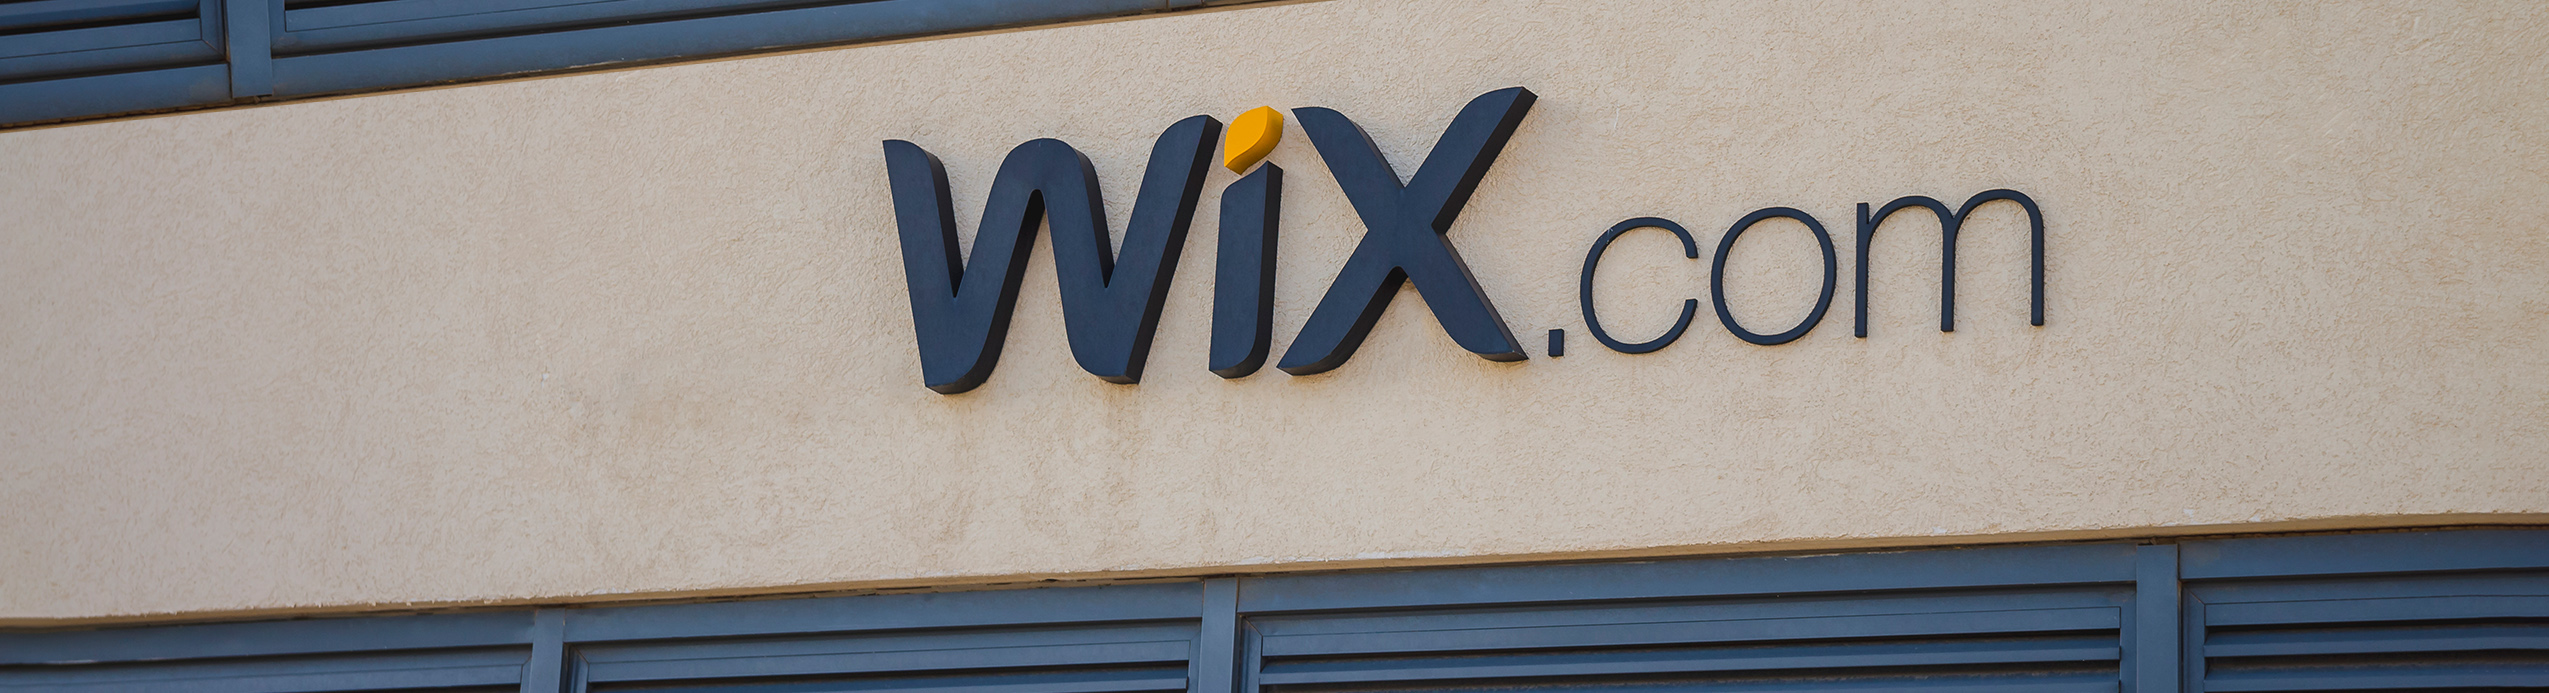 Wix Payment Processing